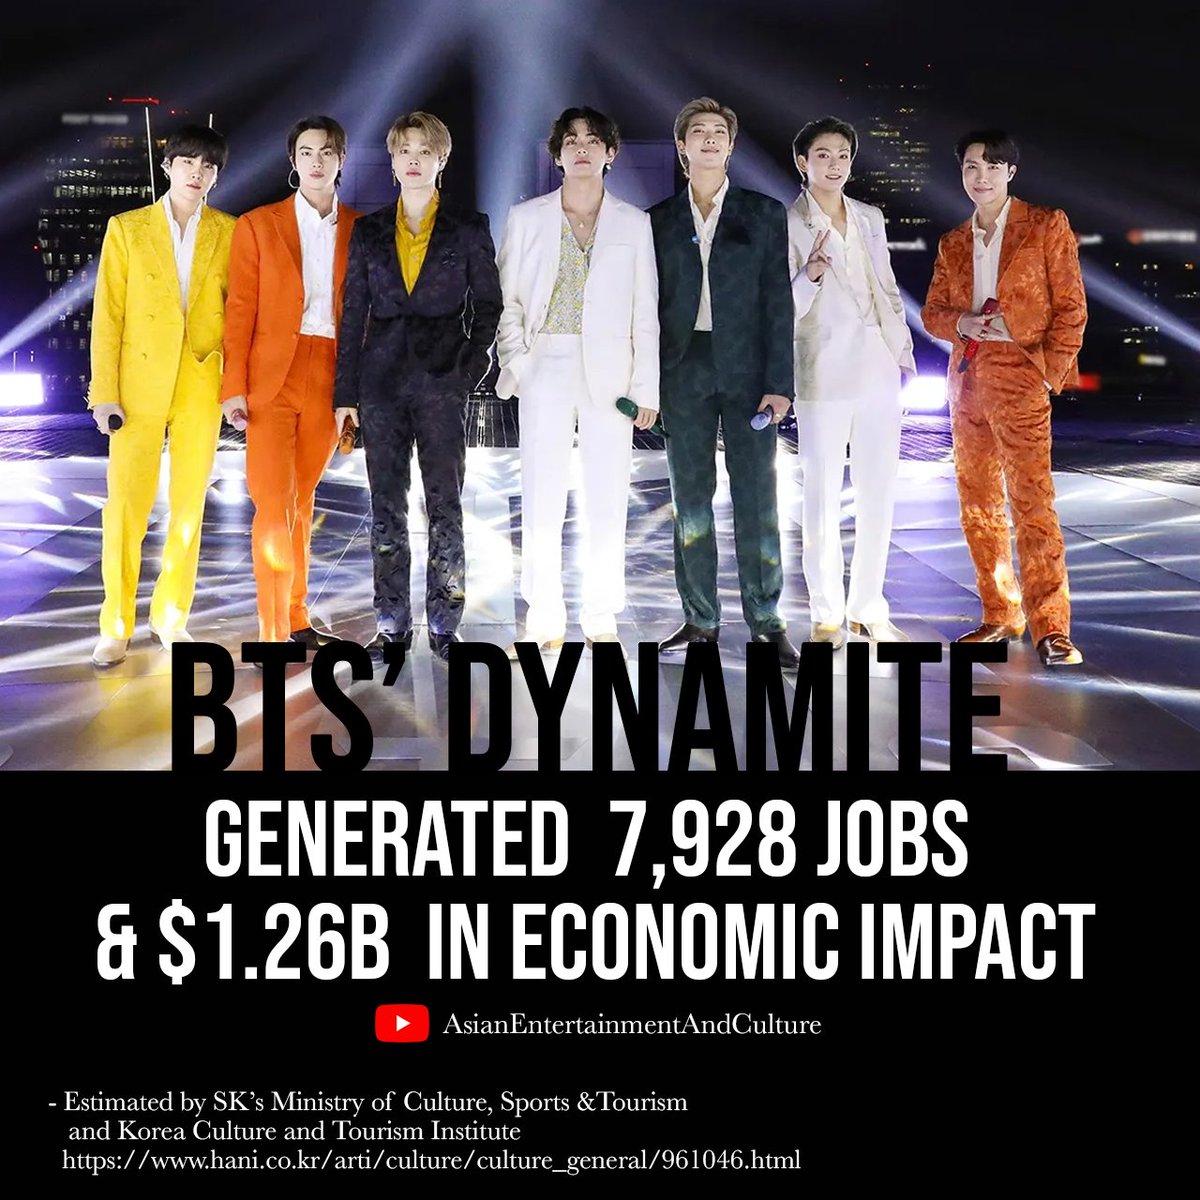 SK's Ministry of Culture, Sports and Tourism & the Korea Culture & Tourism Institute said, “Dynamite's economic impact is estimated at 1.7 trillion won, and created up to 7,928 jobs created by ripple effects.' OMFGGGGG 😭😭😭😭😭